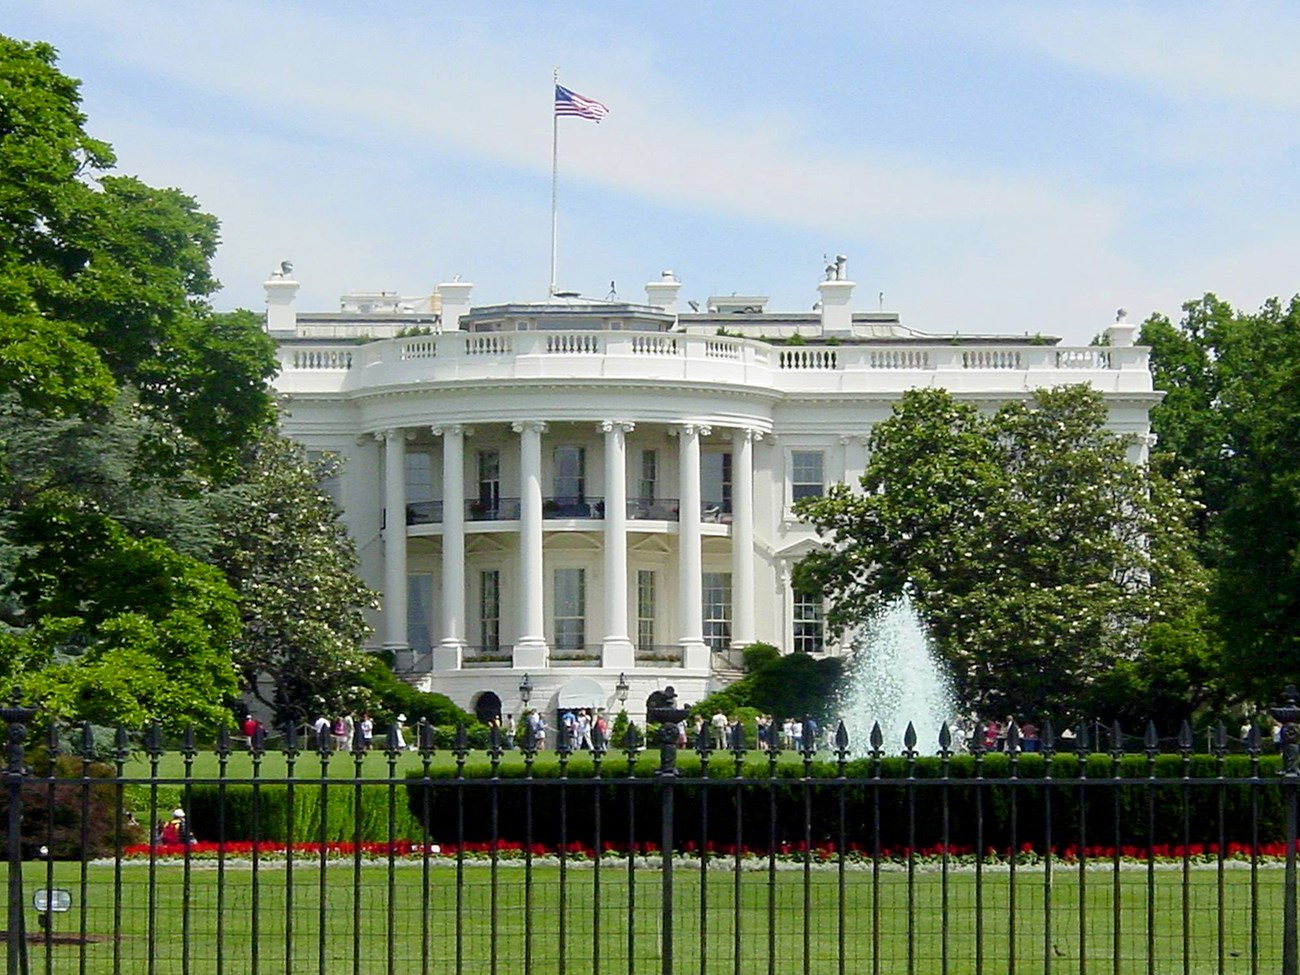 View of the White House and grounds from behind an iron fence